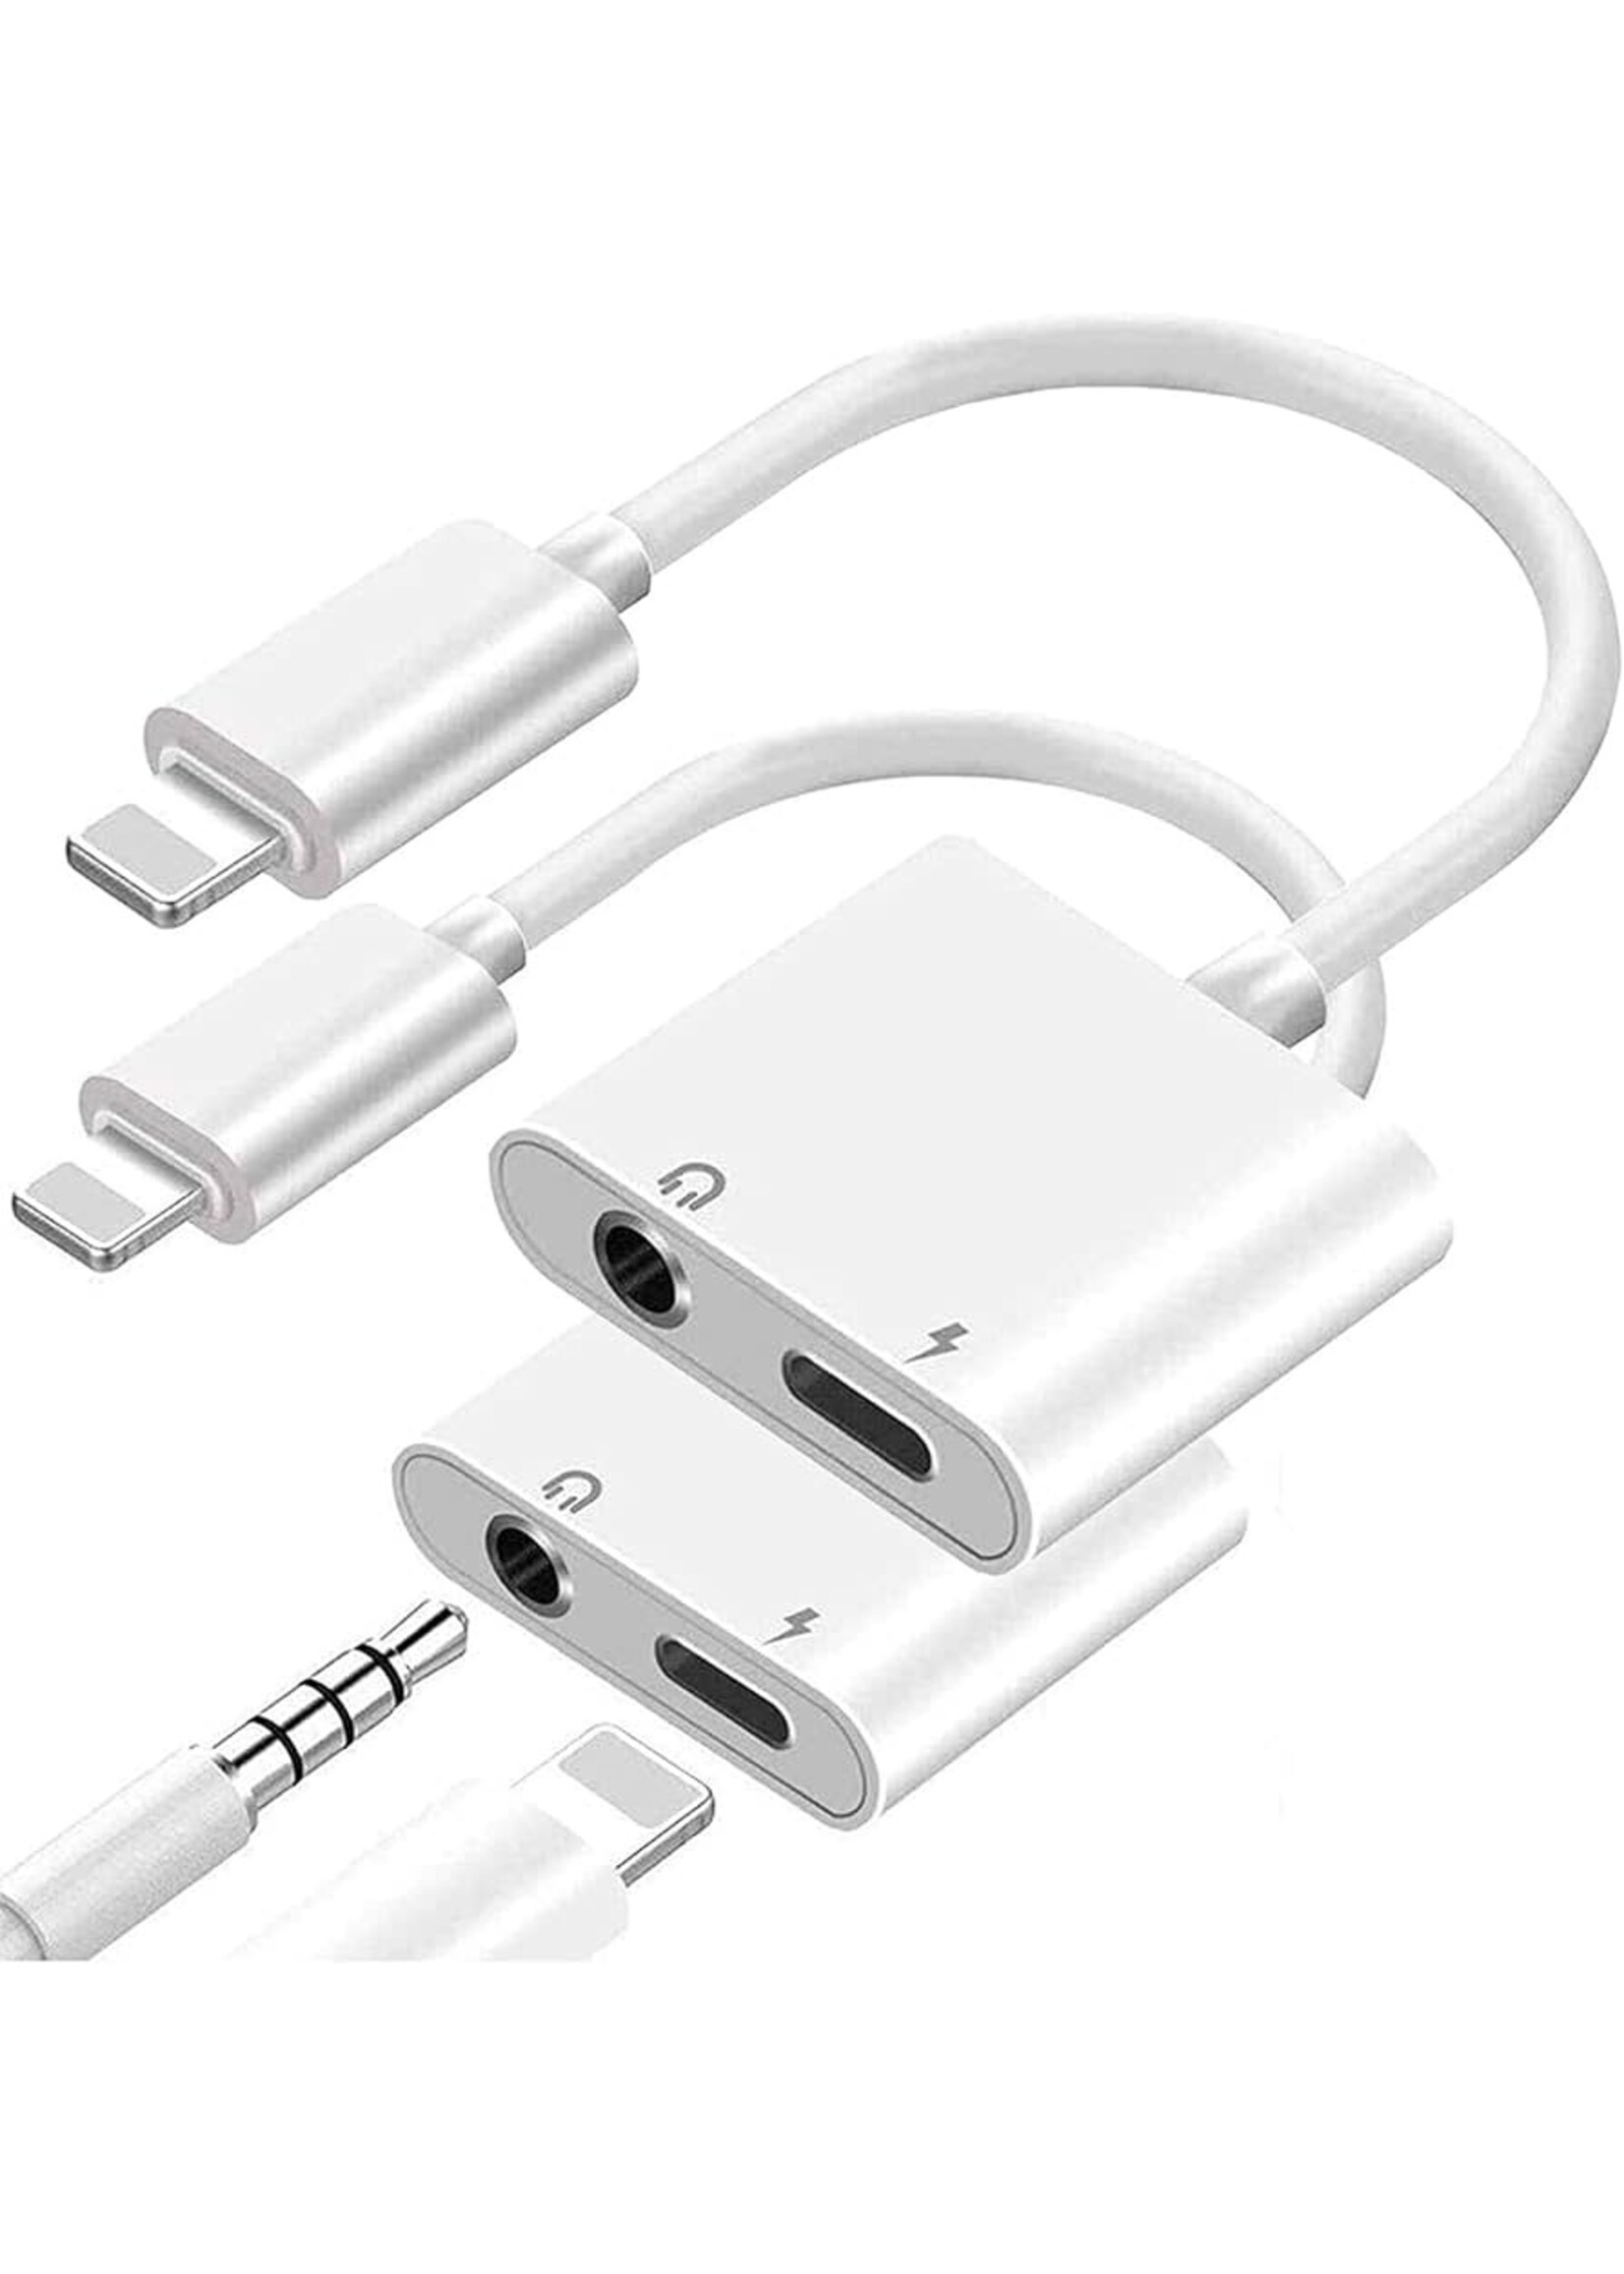 Apple Lightning to 3.5mm Headphone Jack Adapter w/charge port